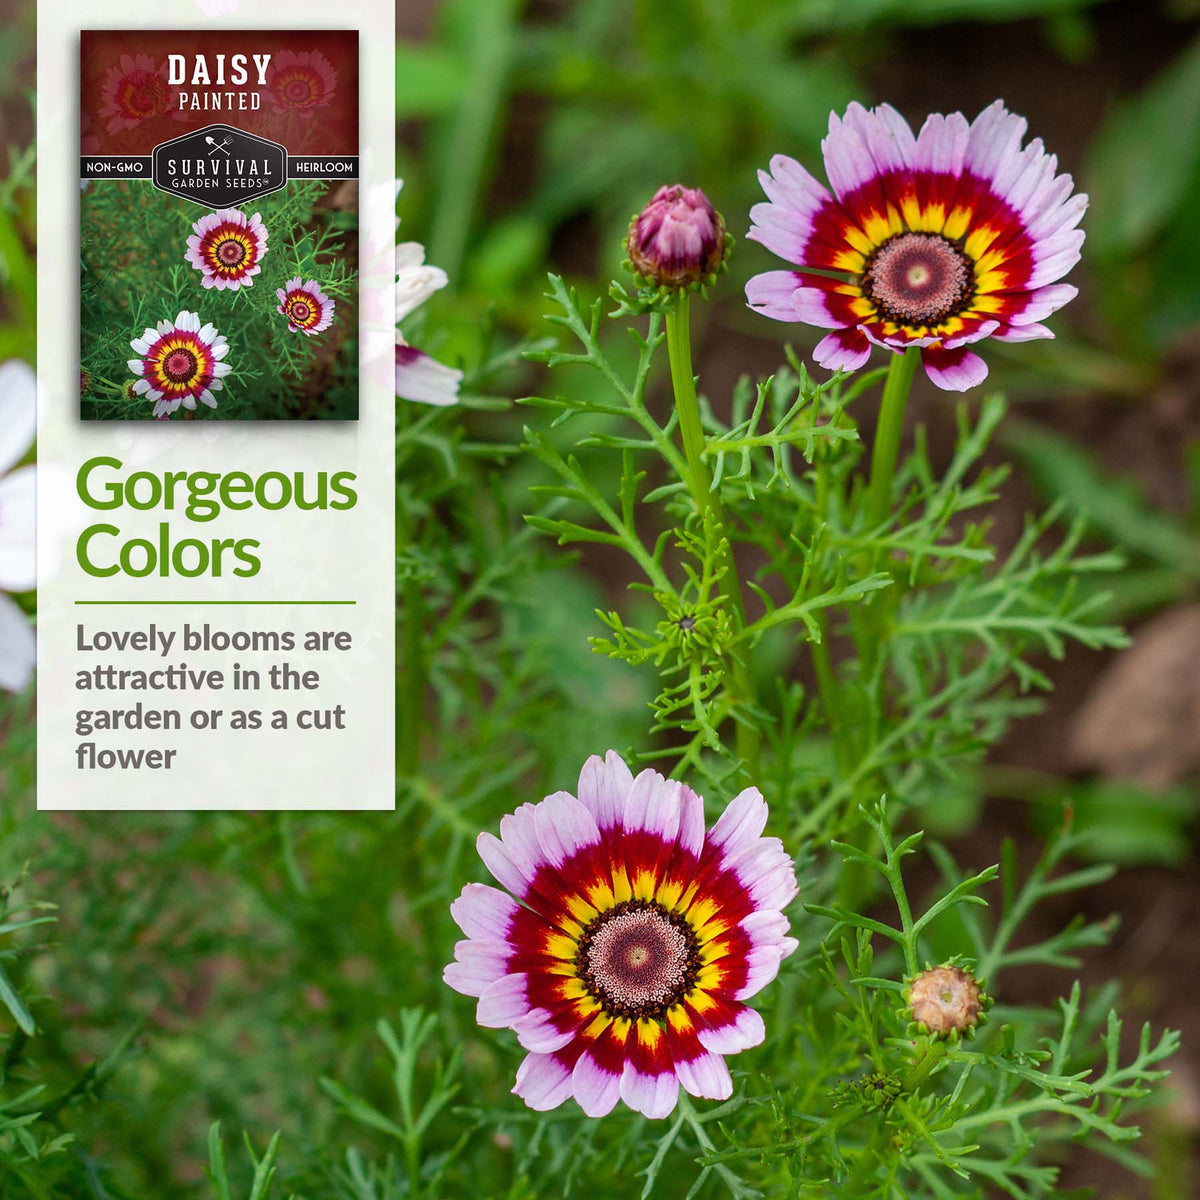 Painted daisies have lovely blooms that are attractive in the garden or as cut flowers